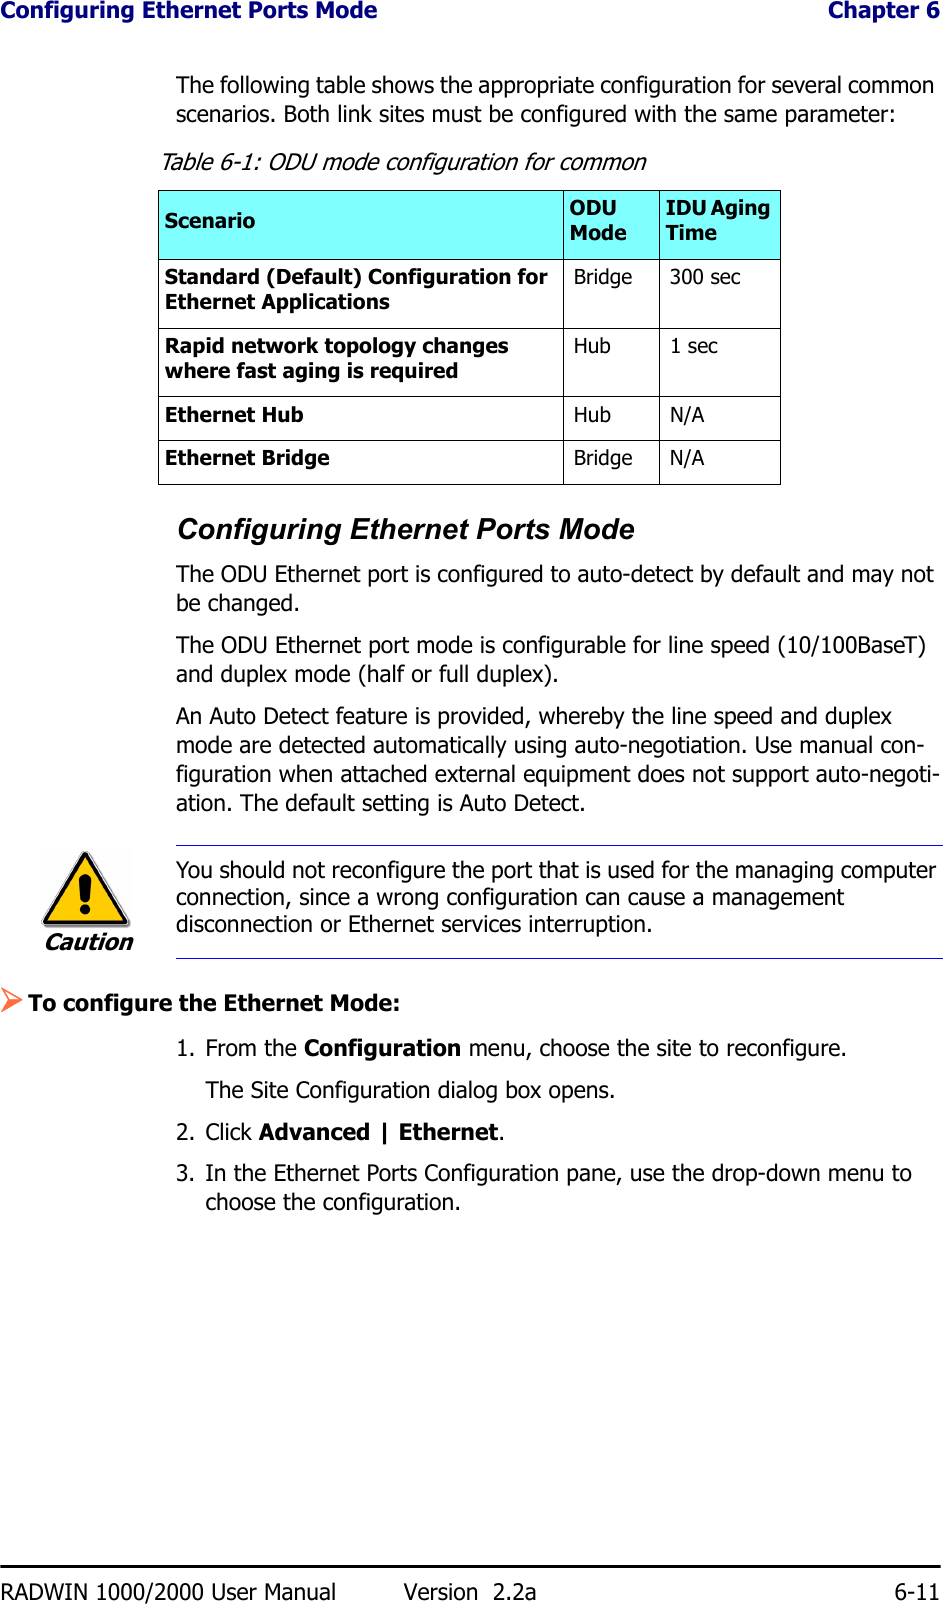 Configuring Ethernet Ports Mode  Chapter 6RADWIN 1000/2000 User Manual Version  2.2a 6-11The following table shows the appropriate configuration for several common scenarios. Both link sites must be configured with the same parameter:Configuring Ethernet Ports ModeThe ODU Ethernet port is configured to auto-detect by default and may not be changed.The ODU Ethernet port mode is configurable for line speed (10/100BaseT) and duplex mode (half or full duplex).An Auto Detect feature is provided, whereby the line speed and duplex mode are detected automatically using auto-negotiation. Use manual con-figuration when attached external equipment does not support auto-negoti-ation. The default setting is Auto Detect.¾To configure the Ethernet Mode:1. From the Configuration menu, choose the site to reconfigure.The Site Configuration dialog box opens.2. Click Advanced | Ethernet.3. In the Ethernet Ports Configuration pane, use the drop-down menu to choose the configuration.Table 6-1: ODU mode configuration for commonScenario ODU ModeIDU Aging TimeStandard (Default) Configuration for Ethernet ApplicationsBridge 300 secRapid network topology changes where fast aging is requiredHub 1 secEthernet Hub Hub N/AEthernet Bridge Bridge N/ACautionYou should not reconfigure the port that is used for the managing computer connection, since a wrong configuration can cause a management disconnection or Ethernet services interruption.